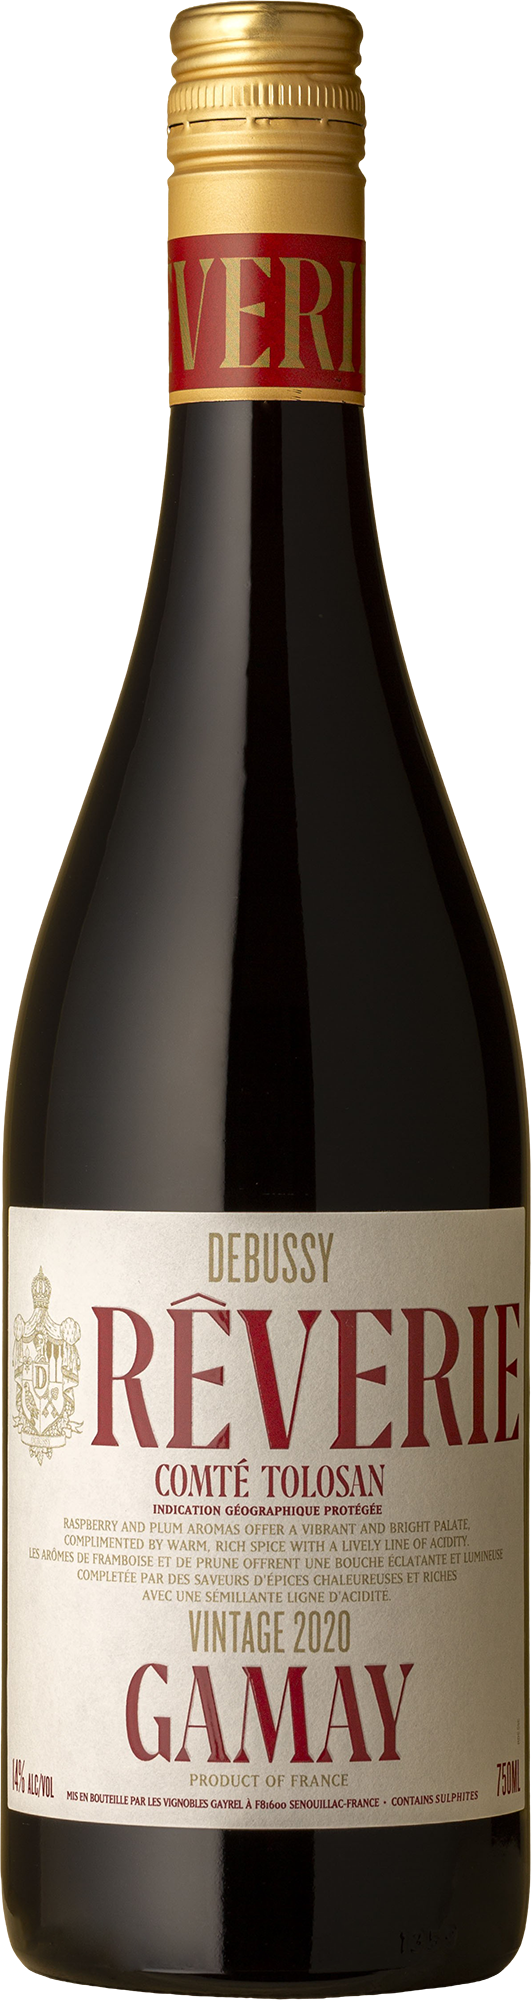 Debussy - 'Rêverie' Comté Tolosan Gamay 2020 Red Wine